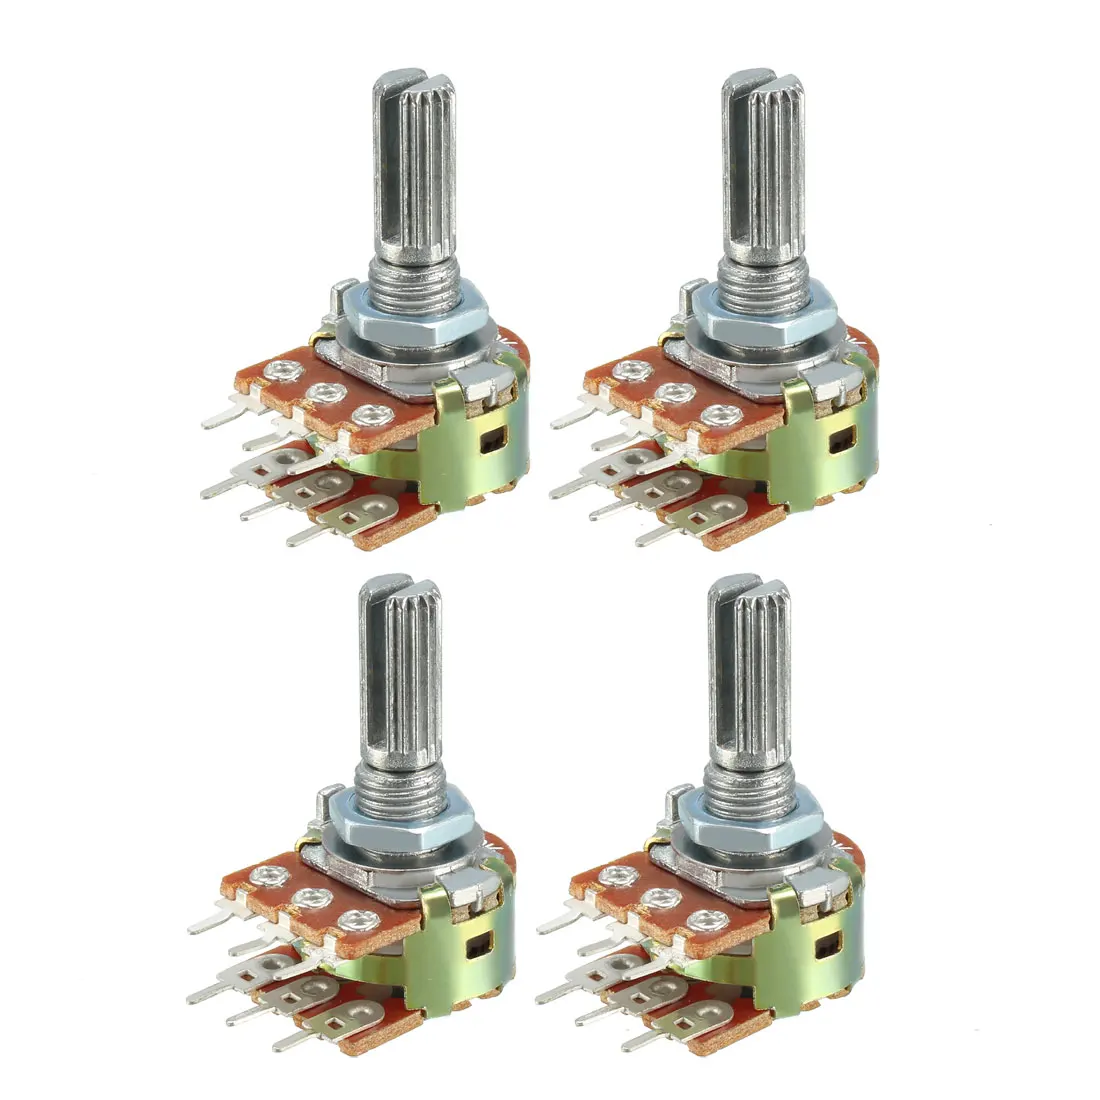 uxcell WH148 500K Ohm Variable Resistors Dual Turn Rotary Carbon Film Taper Potentiometer 2pcs 